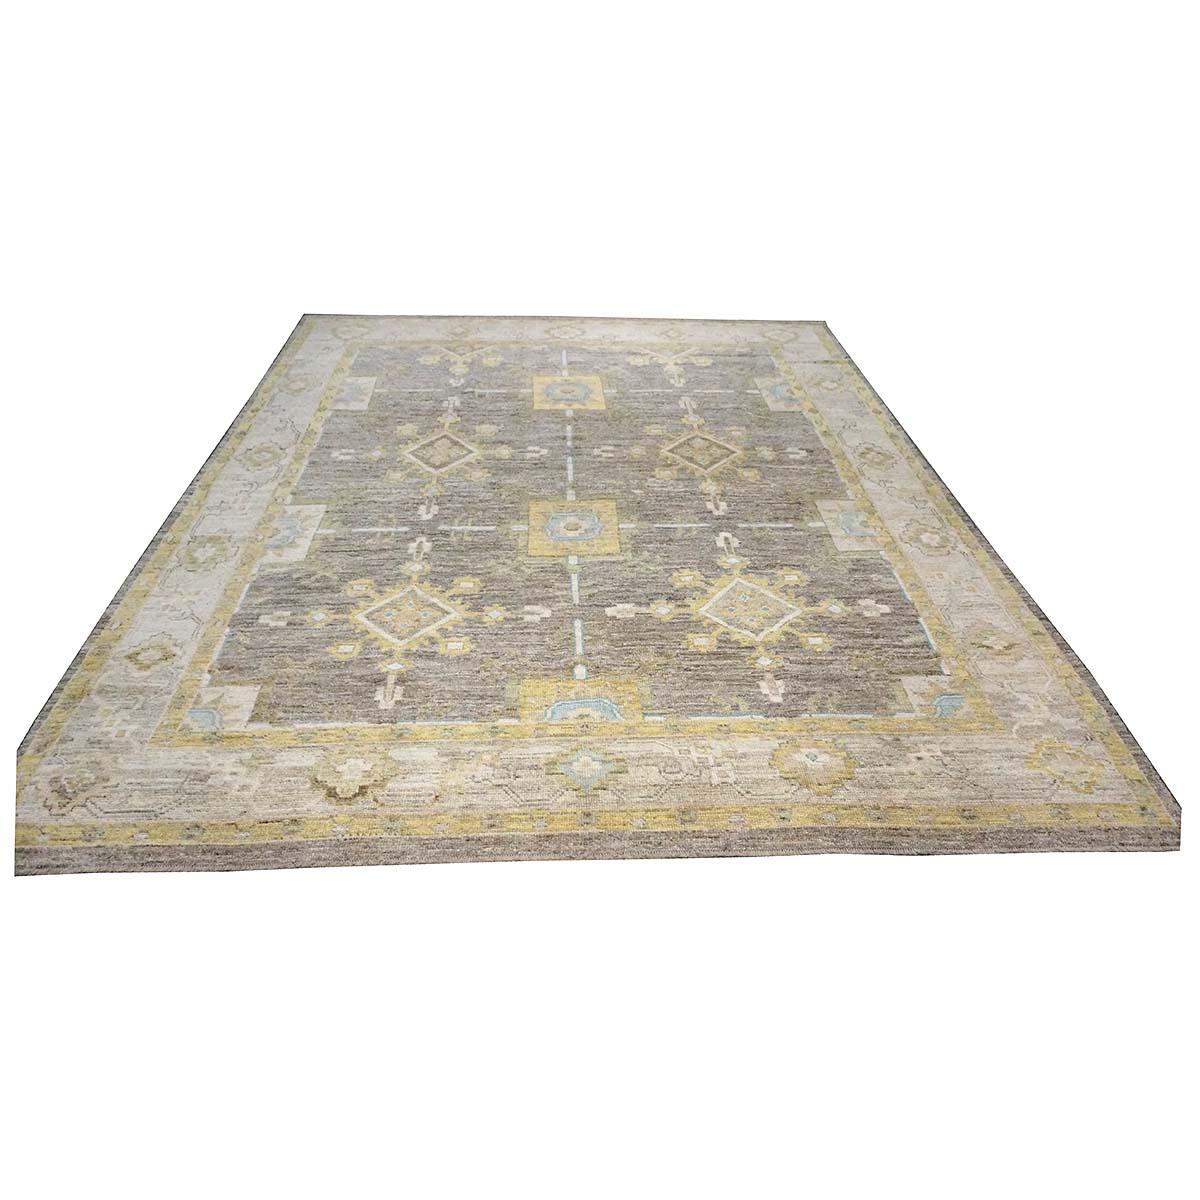   Ashly Fine Rugs presents a 21st century Turkish Oushak 10x13 Handmade Area Rug. Oushak weavings began in a location just south of Istanbul, in a region that was to become the rugs namesake, Oushak. Although nomads first produced the rugs for